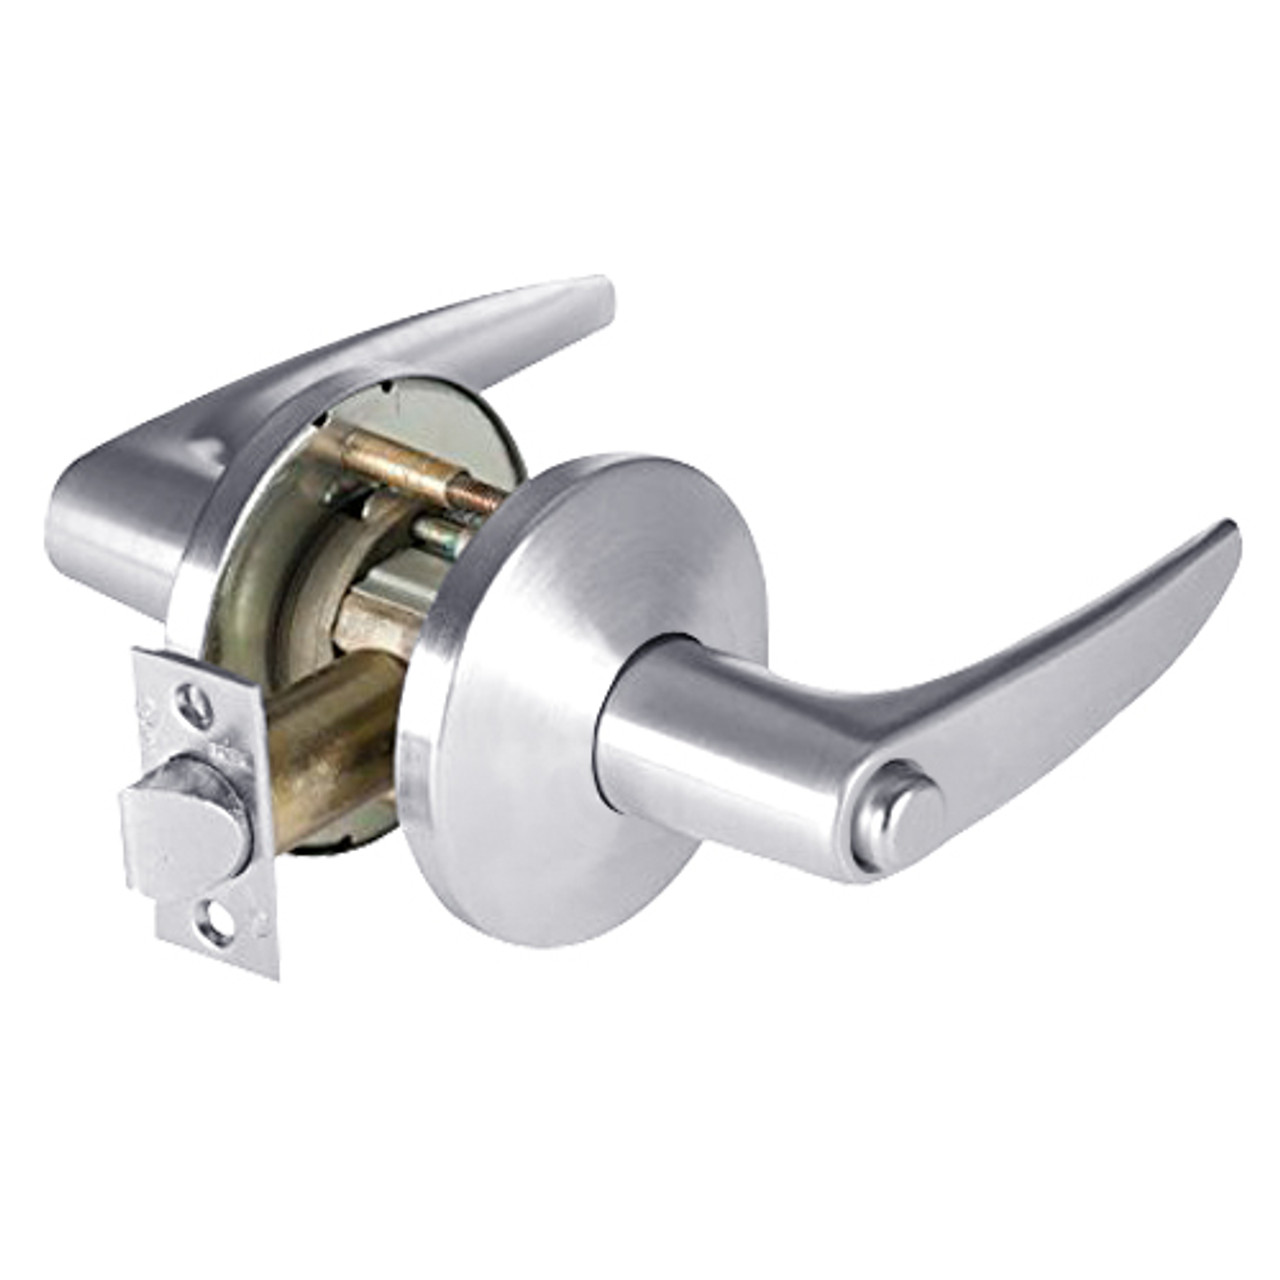 9K30L16LSTK625 Best 9K Series Privacy Heavy Duty Cylindrical Lever Locks with Curved Without Return Lever Design in Bright Chrome